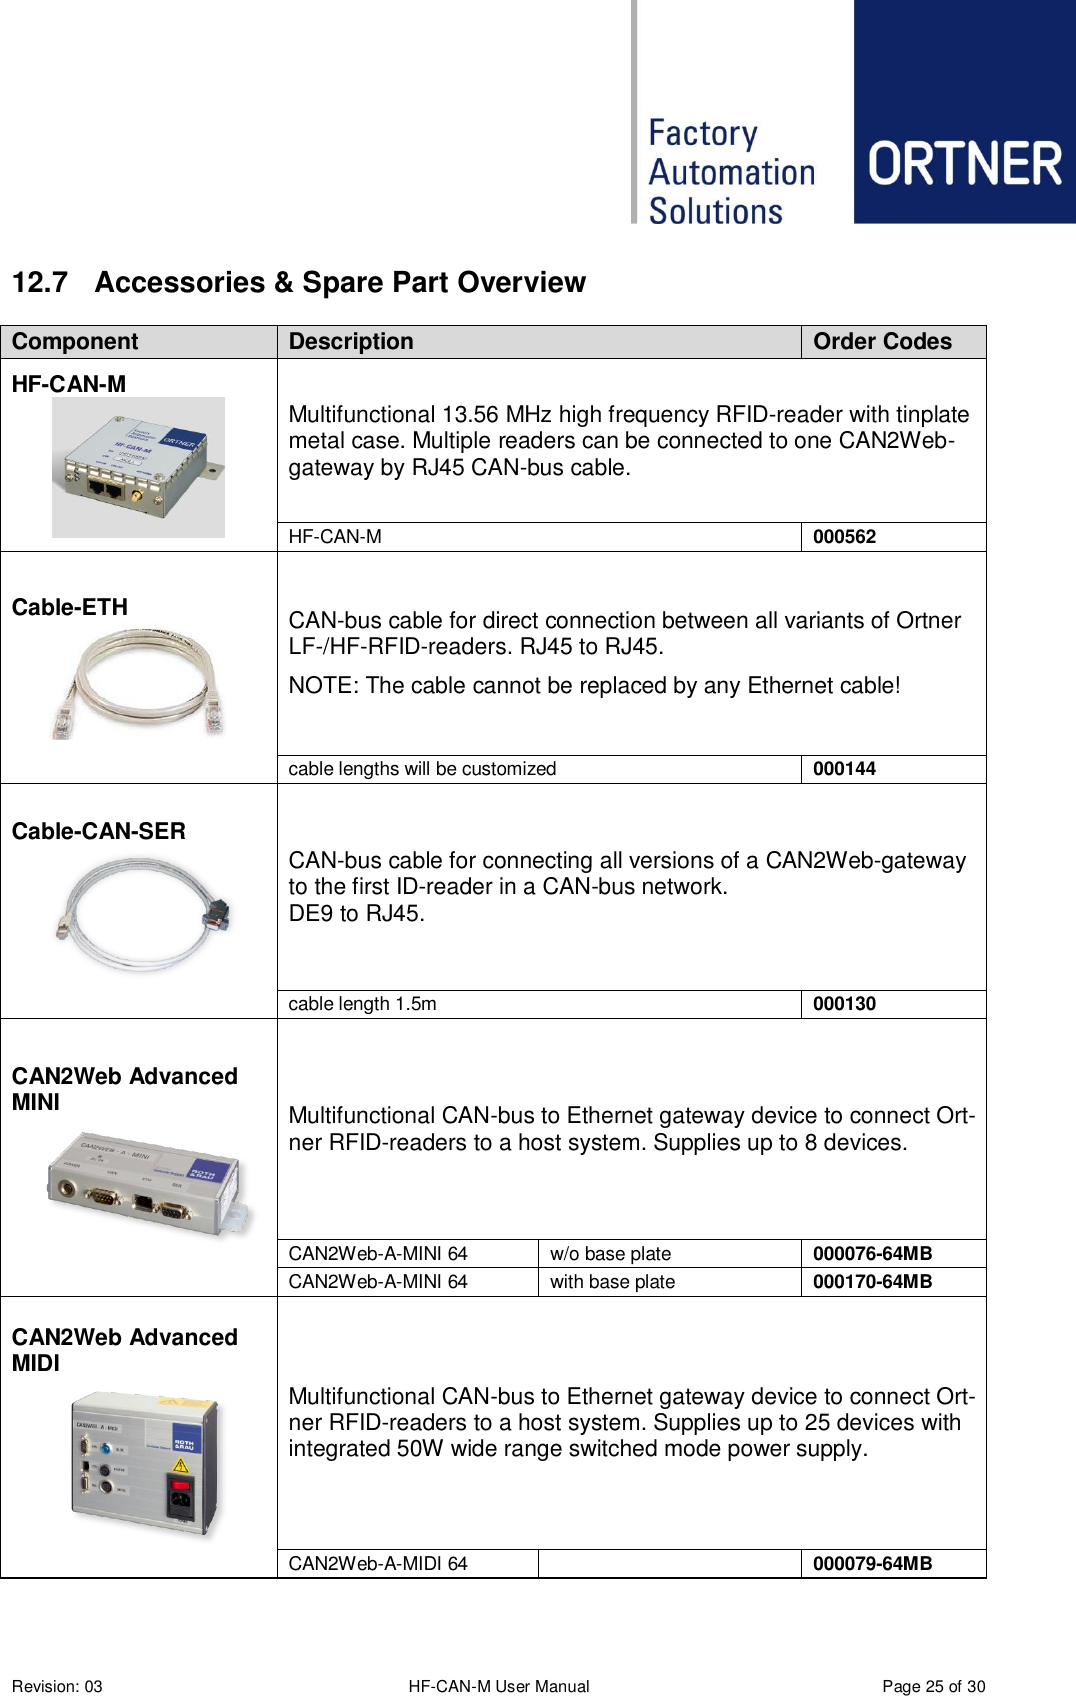  Revision: 03 HF-CAN-M User Manual  Page 25 of 30 12.7  Accessories &amp; Spare Part Overview Component Description Order Codes HF-CAN-M  Multifunctional 13.56 MHz high frequency RFID-reader with tinplate metal case. Multiple readers can be connected to one CAN2Web-gateway by RJ45 CAN-bus cable. HF-CAN-M 000562 Cable-ETH  CAN-bus cable for direct connection between all variants of Ortner LF-/HF-RFID-readers. RJ45 to RJ45. NOTE: The cable cannot be replaced by any Ethernet cable! cable lengths will be customized 000144 Cable-CAN-SER  CAN-bus cable for connecting all versions of a CAN2Web-gateway to the first ID-reader in a CAN-bus network. DE9 to RJ45. cable length 1.5m 000130 CAN2Web Advanced MINI  Multifunctional CAN-bus to Ethernet gateway device to connect Ort-ner RFID-readers to a host system. Supplies up to 8 devices. CAN2Web-A-MINI 64 w/o base plate 000076-64MB CAN2Web-A-MINI 64 with base plate  000170-64MB CAN2Web Advanced MIDI  Multifunctional CAN-bus to Ethernet gateway device to connect Ort-ner RFID-readers to a host system. Supplies up to 25 devices with integrated 50W wide range switched mode power supply. CAN2Web-A-MIDI 64  000079-64MB 